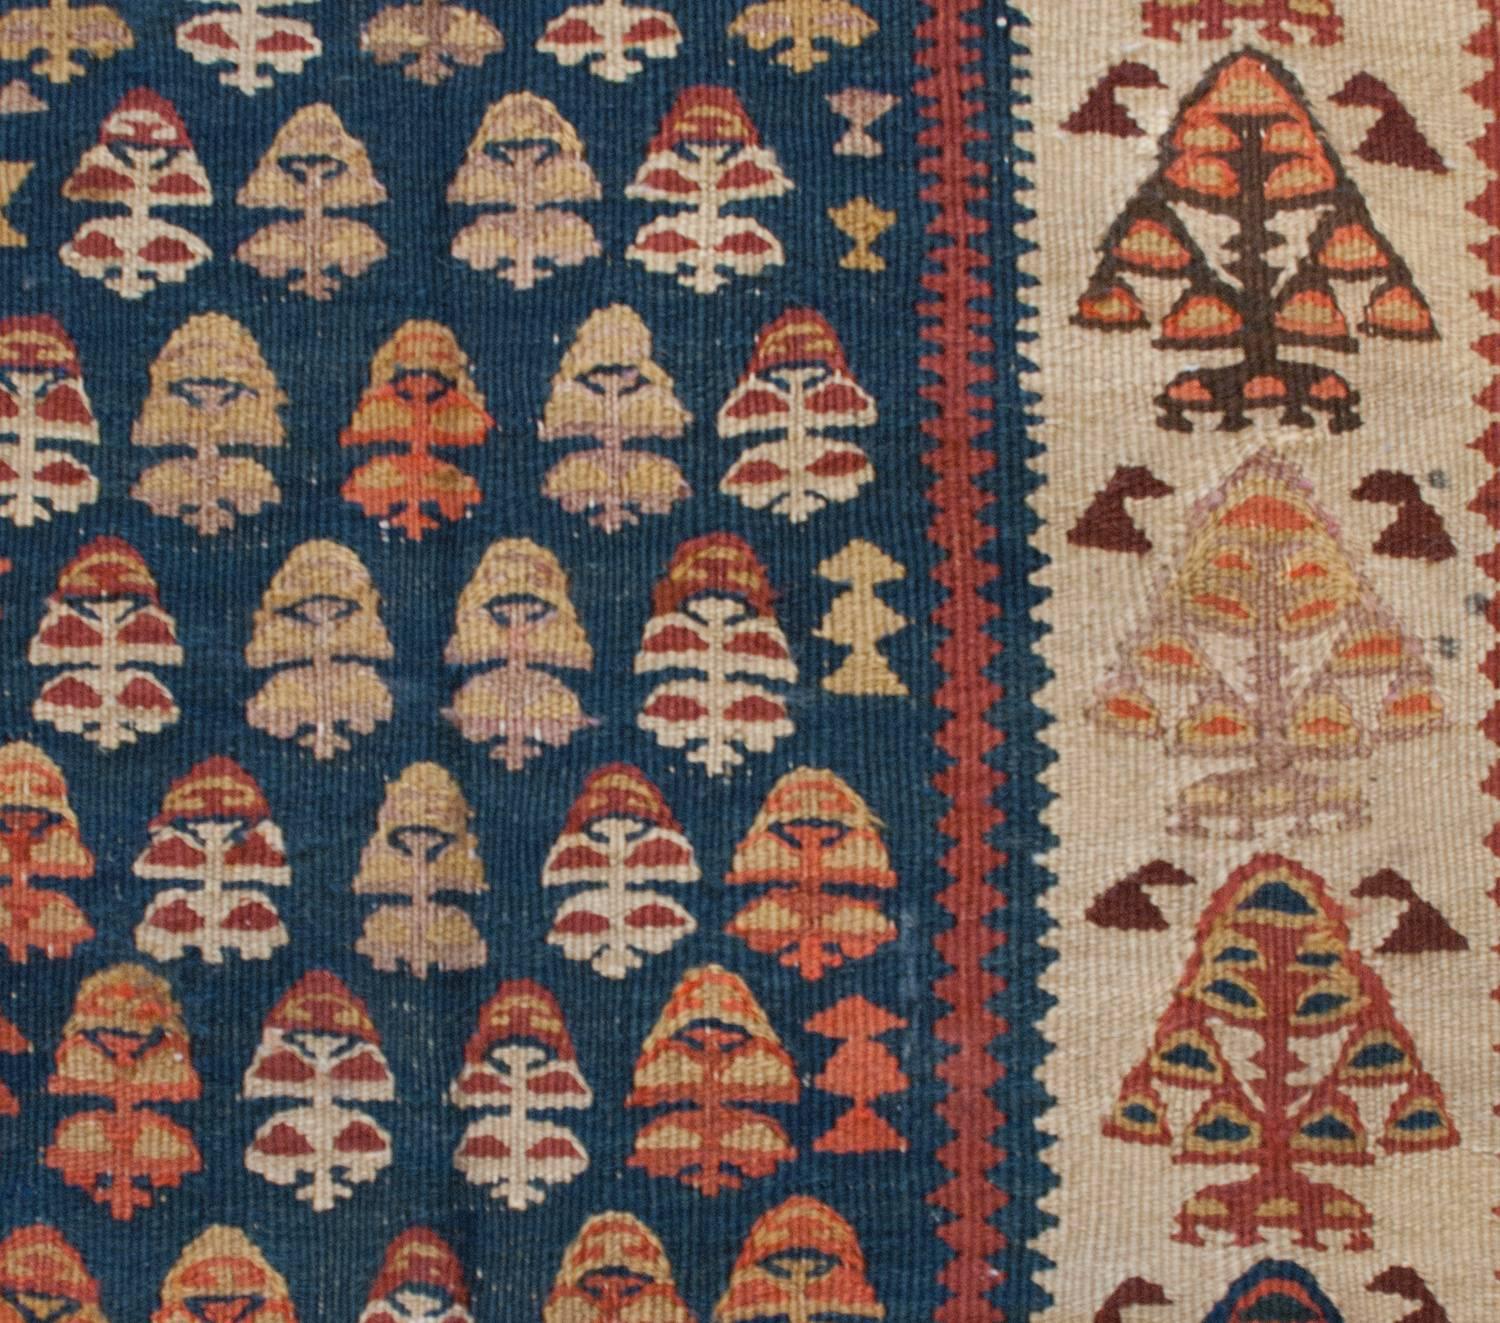 An exceptional early 20th century Kurdish Kilim runner with an amazing brilliant color pallet of crimson, coral, gold, indigo, and natural wool. The central field is wonderful with stylized trees-of-life in a brilliant indigo background. The border